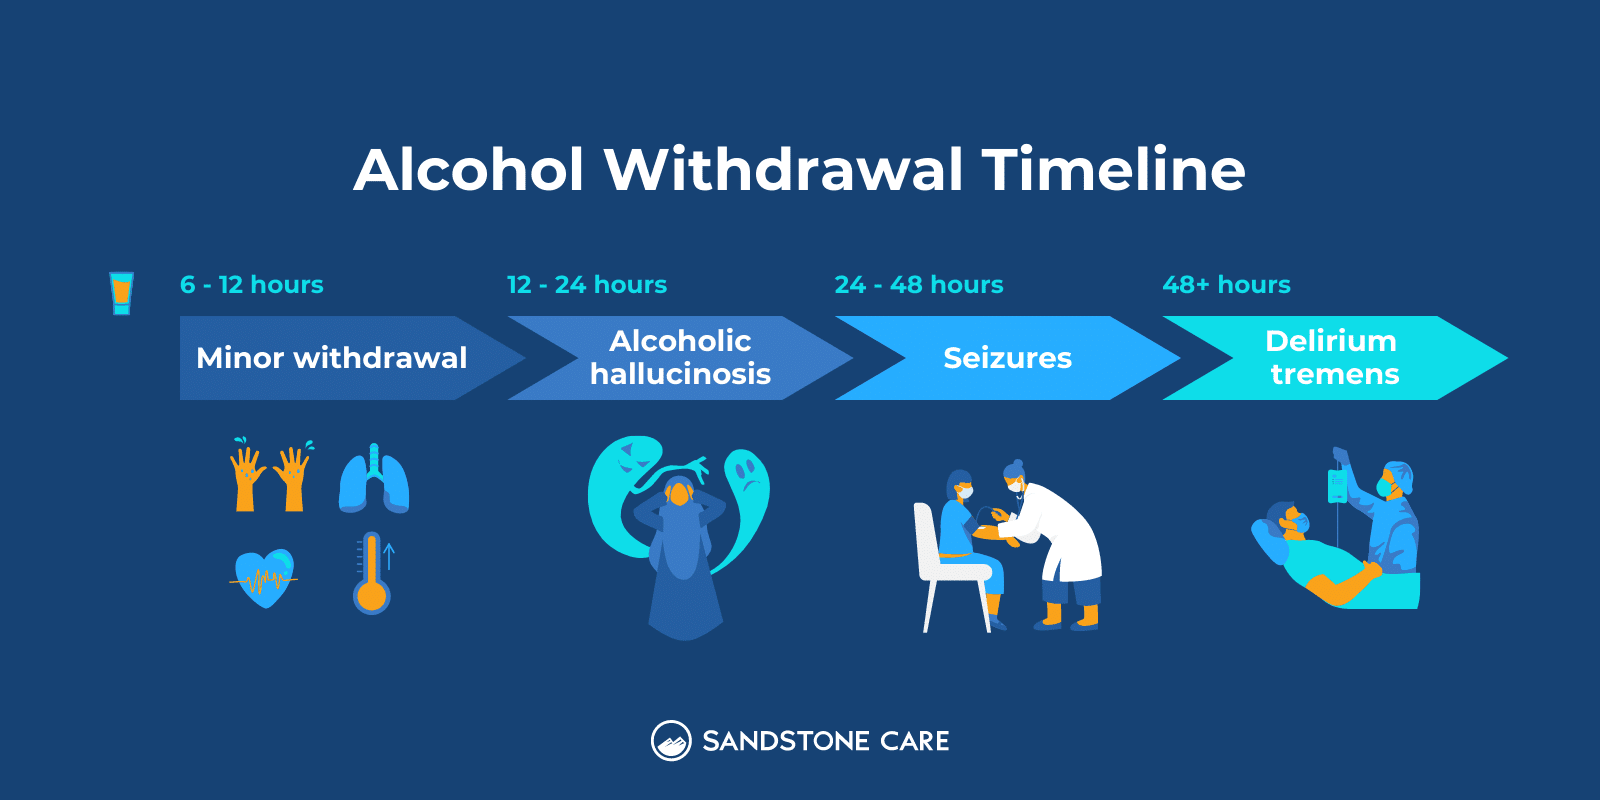 A Timeline of What Happens When You Stop Drinking